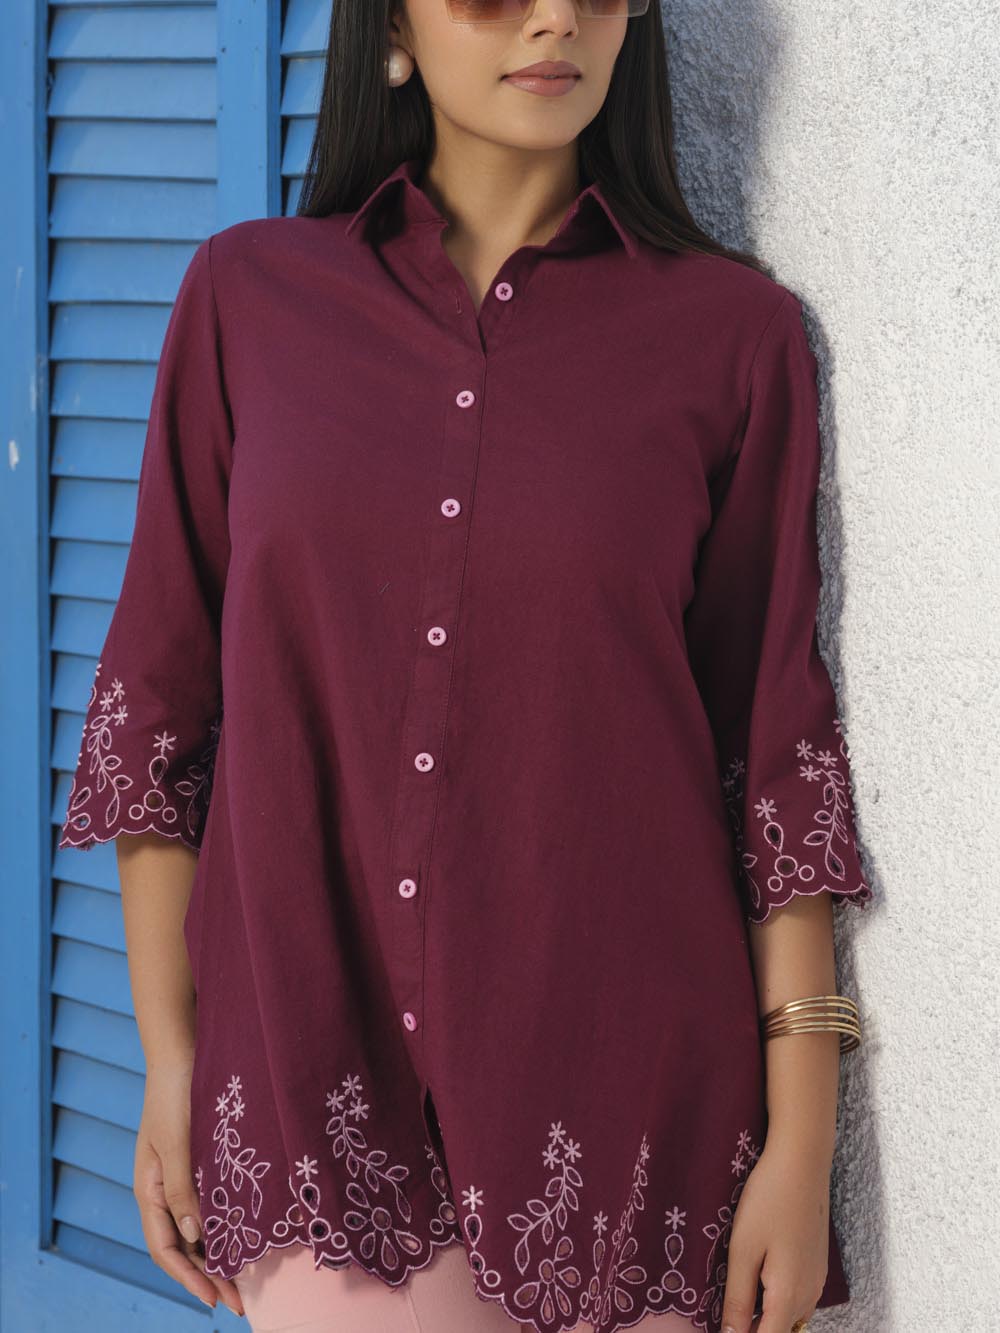 Shirt collar cotton top with cutwork embroidery Etiquette Apparel